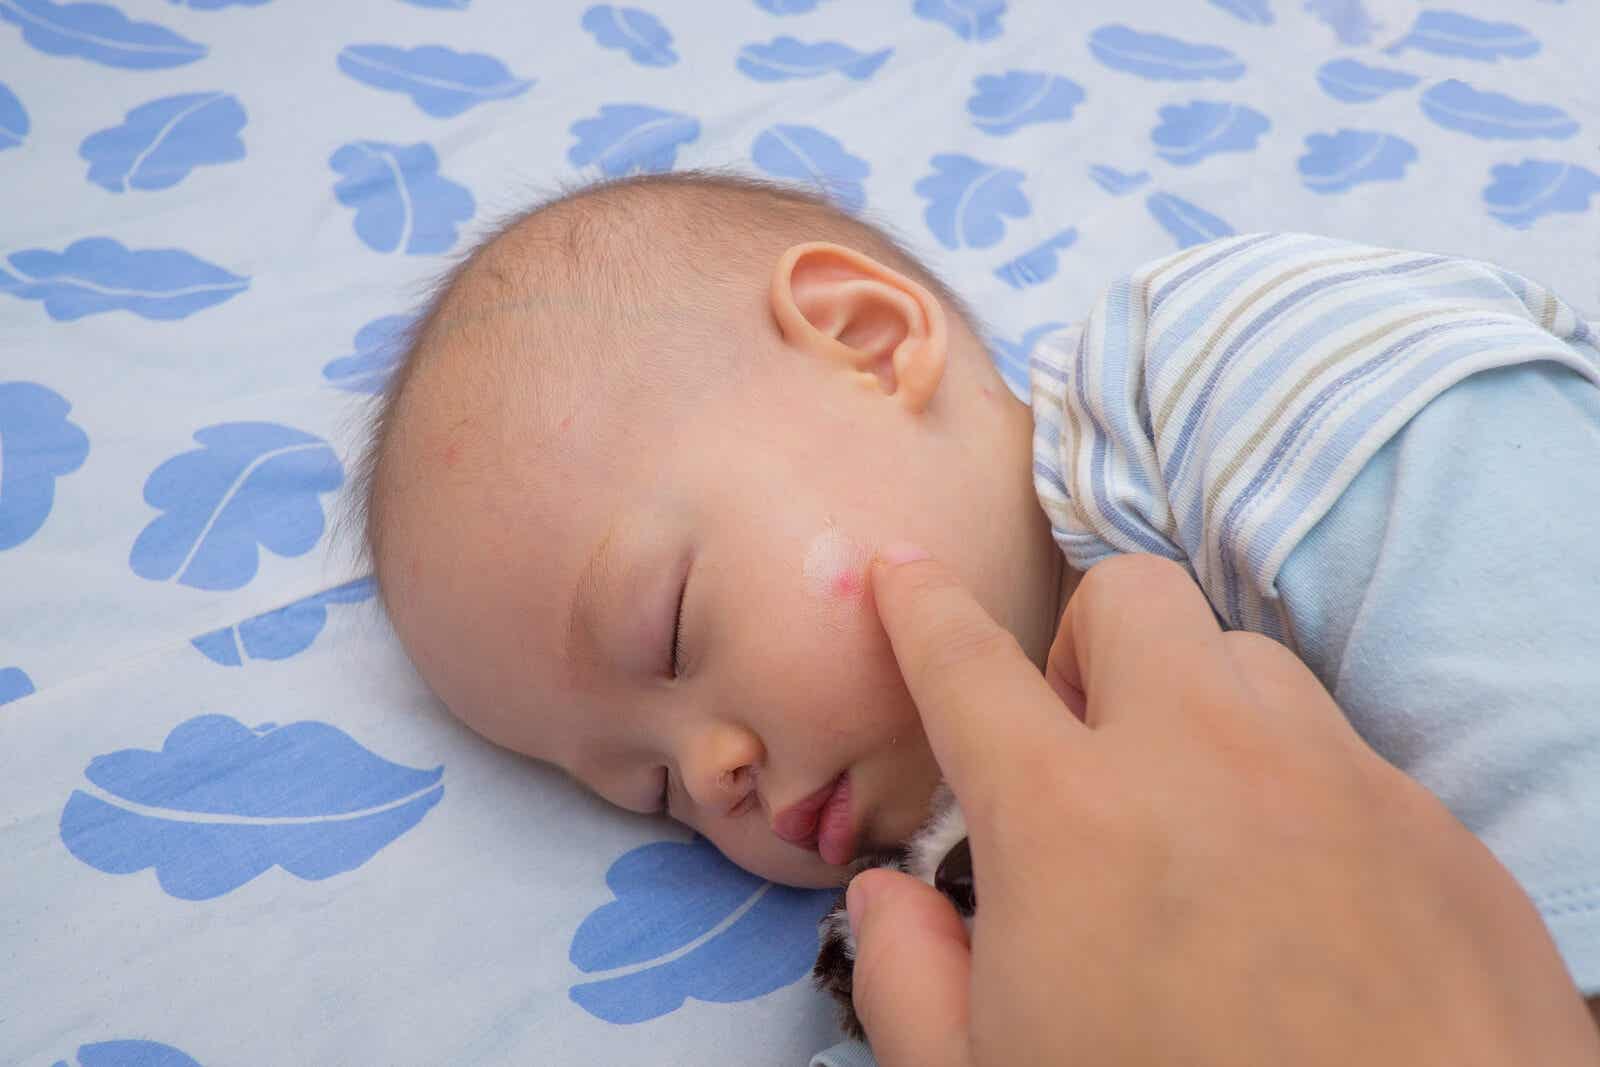 A parent applying cream to a bite on her baby's face.